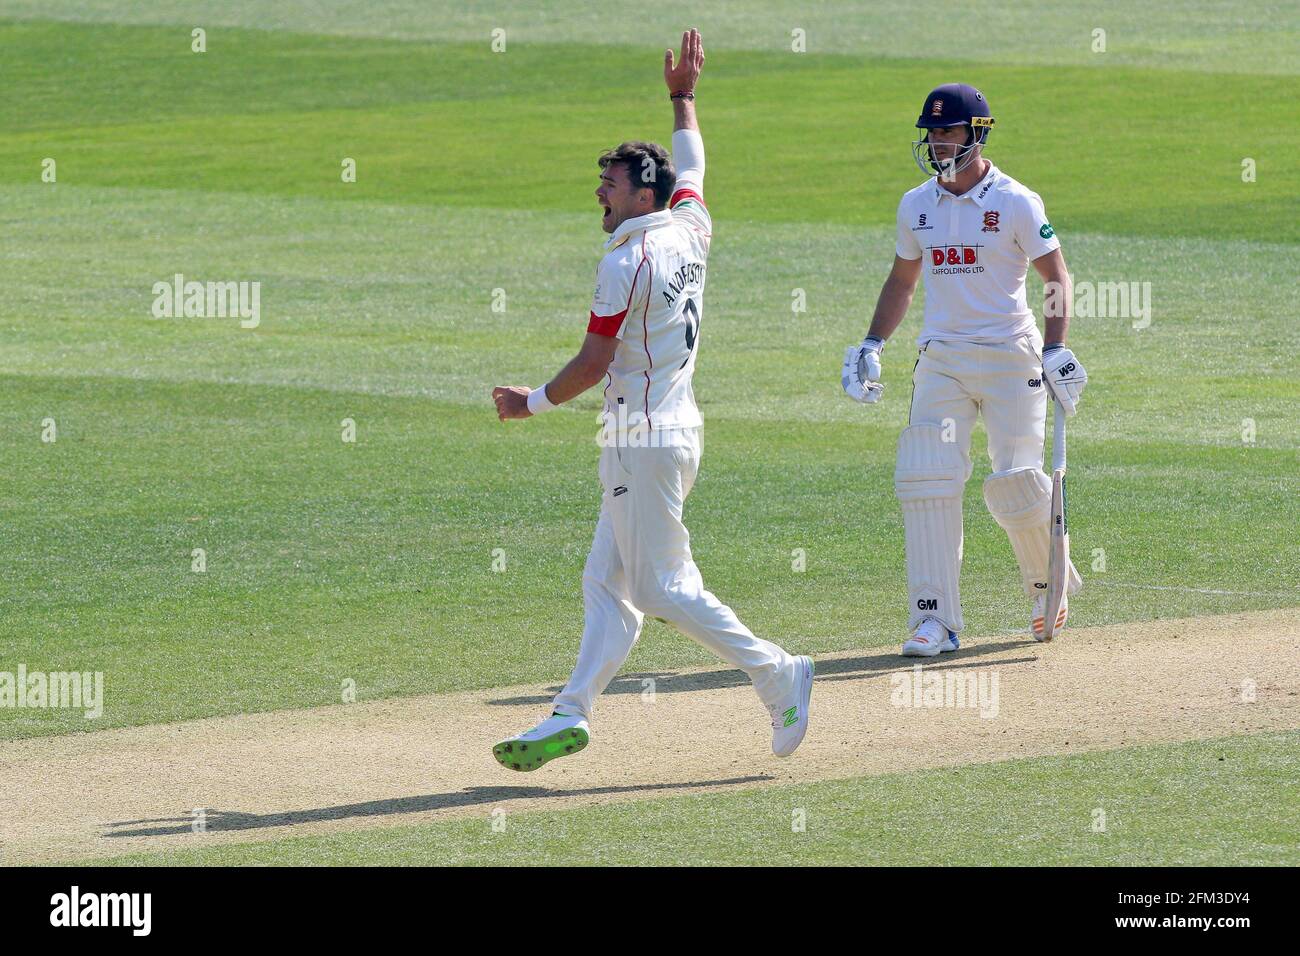 Jimmy Anderson of Lancashire with an appeal for a wicket during Essex CCC vs Lancashire CCC, Specsavers County Championship Division 1 Cricket at The Stock Photo